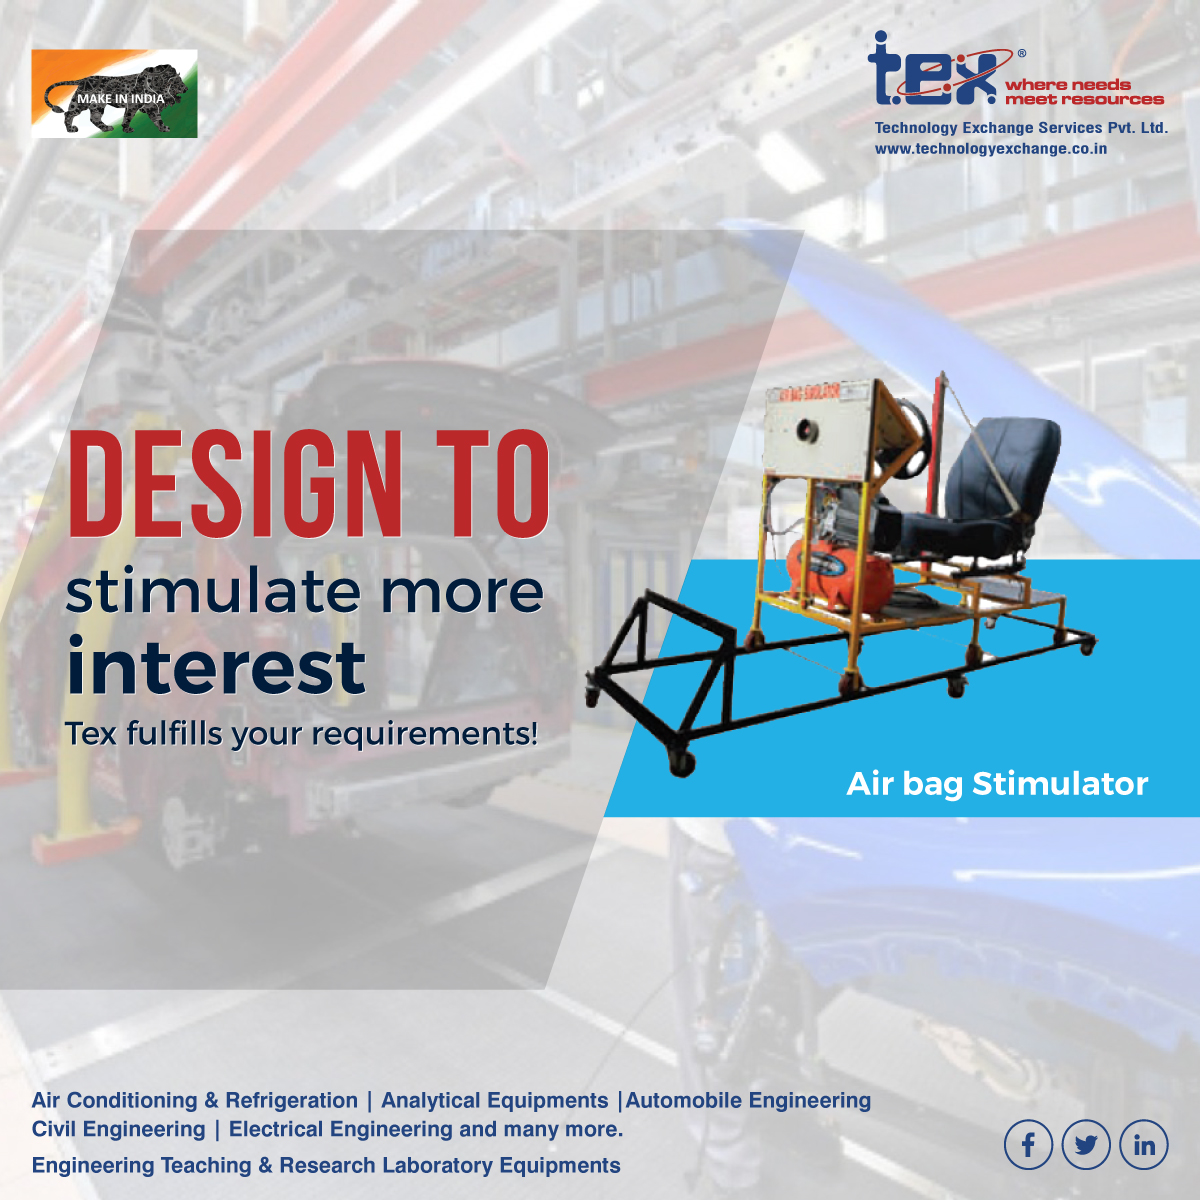 Get the best Air Bag Simulators from Tex that can troubleshoot and verify the wiring harness.

#automobileengineering #automotive #mechanics #mechanicallab #mechanicalworld #automobiles #airbagsimulators #labequipment #equipment #engineeringequipments 

technologyexchange.co.in